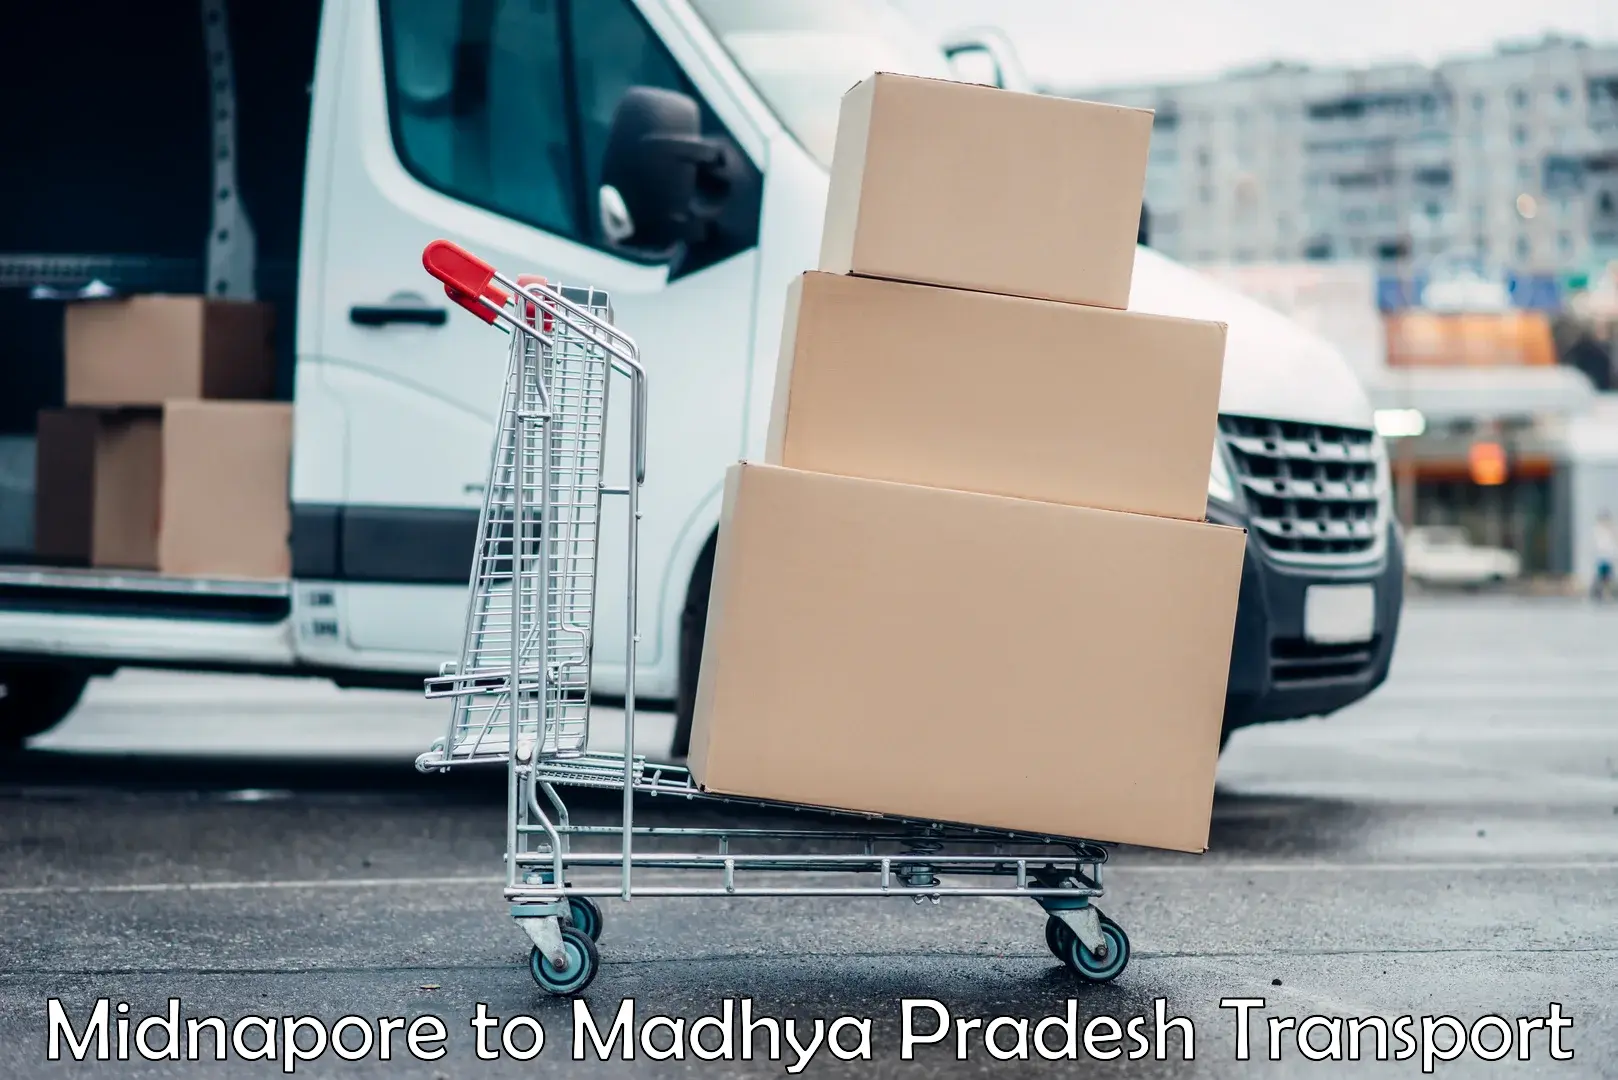 Transport services in Midnapore to Sleemanabad